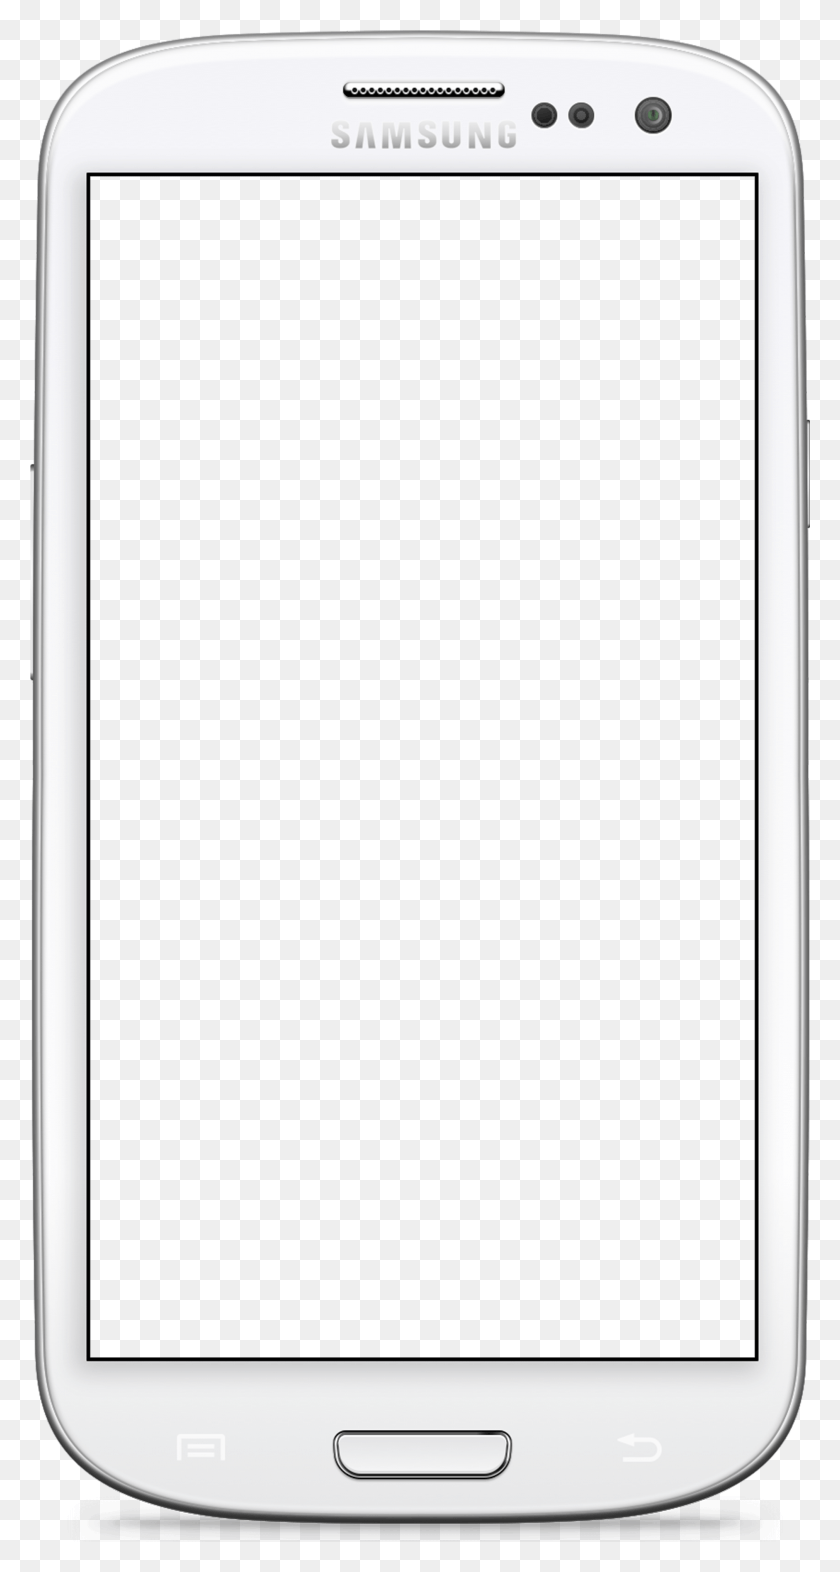 2019x3916 Mobile Phone, Phone, Electronics, Cell Phone Descargar Hd Png